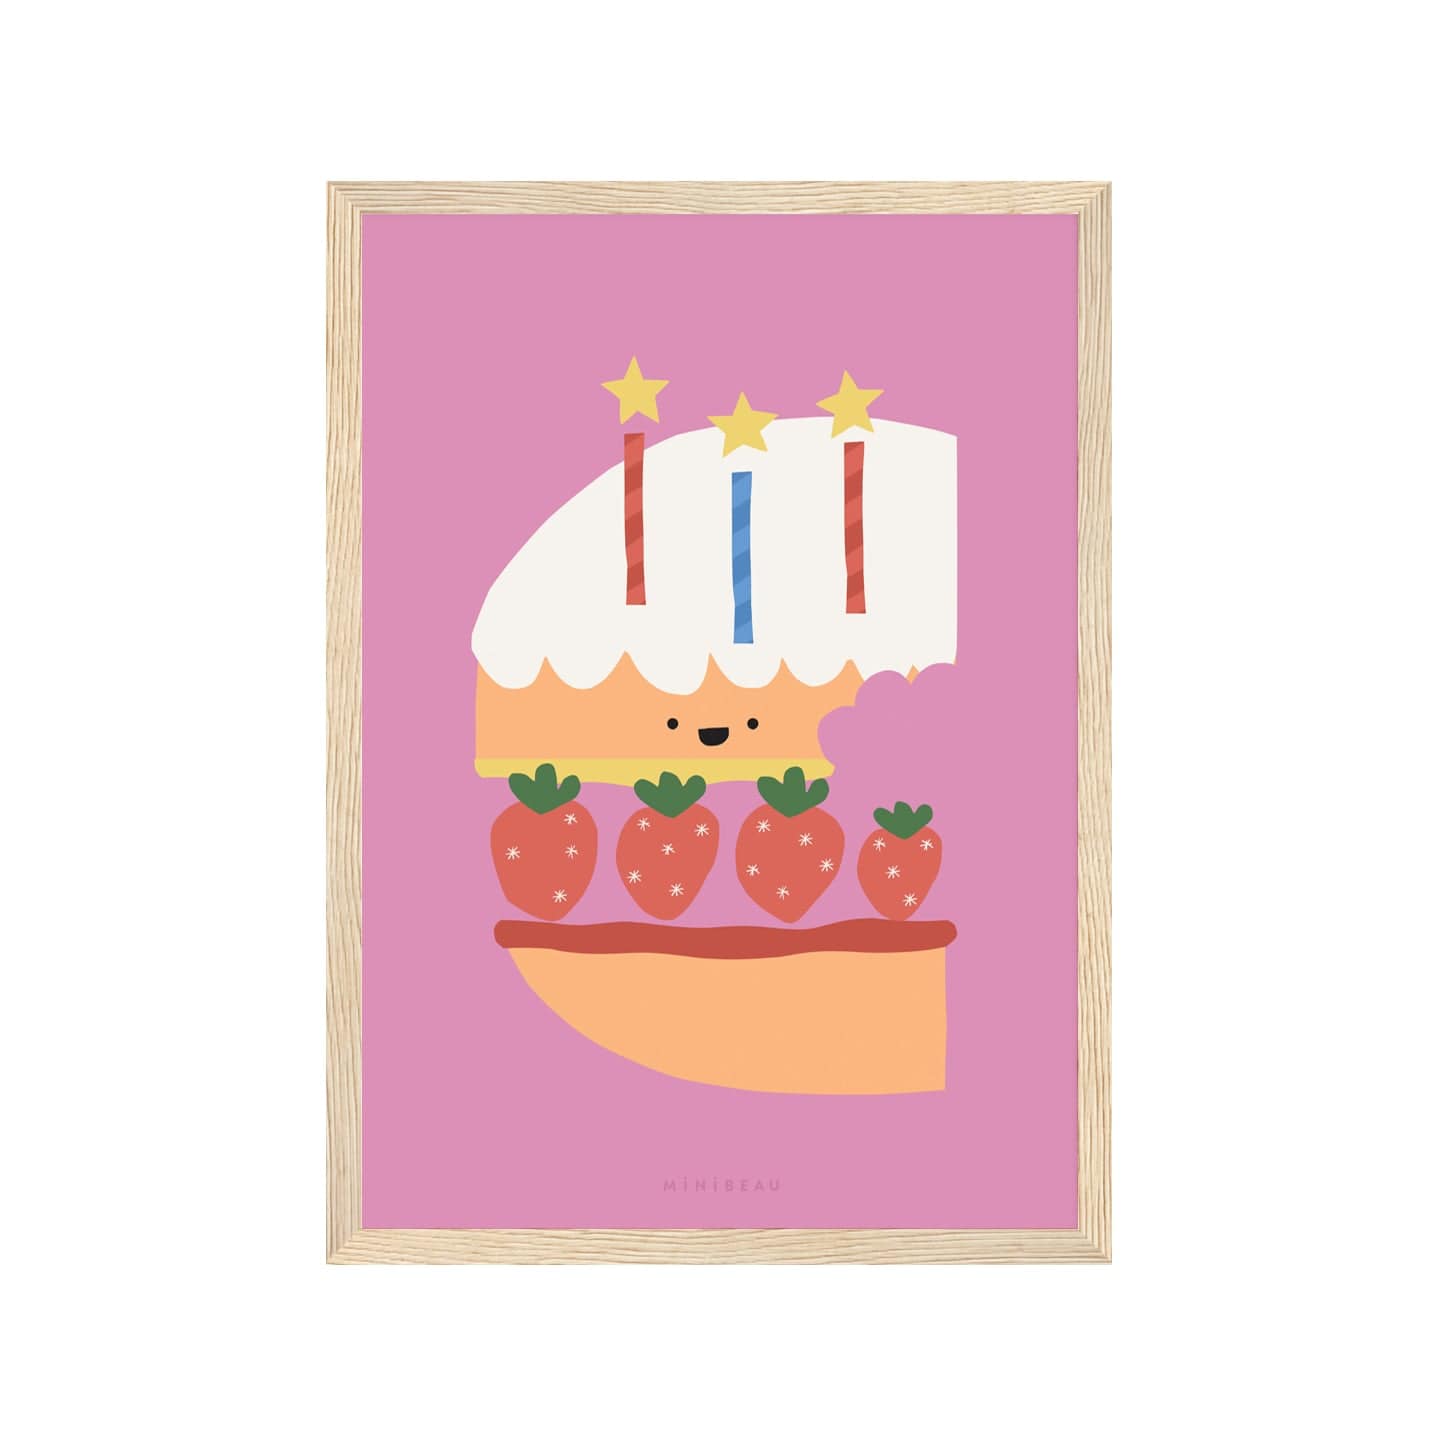 Art print in light wood frame. Our Happy Alphabet 'C' Art Print shows a layered cake in the shape of a C, with a layer of cake, then jam, then strawberries, then cream, then cake then white icing, with 3 candles, 2 red, 2 blue, with stars for flames, on a pink background.